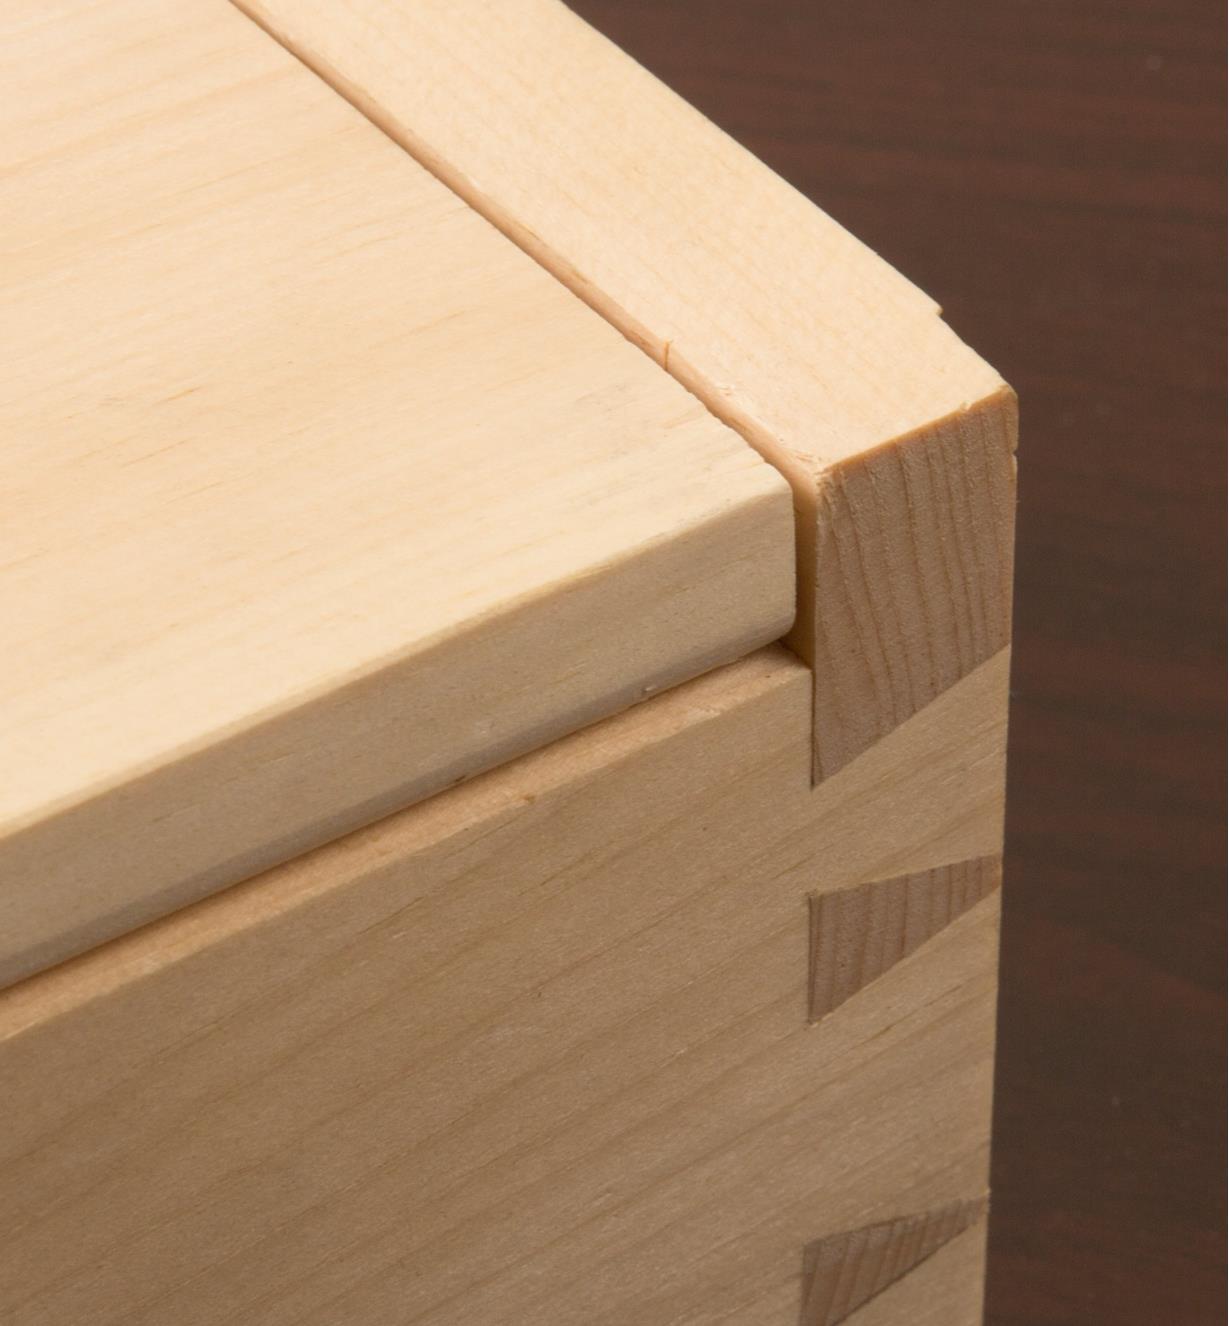 Close-up of corner of box lid with hidden hinge installed